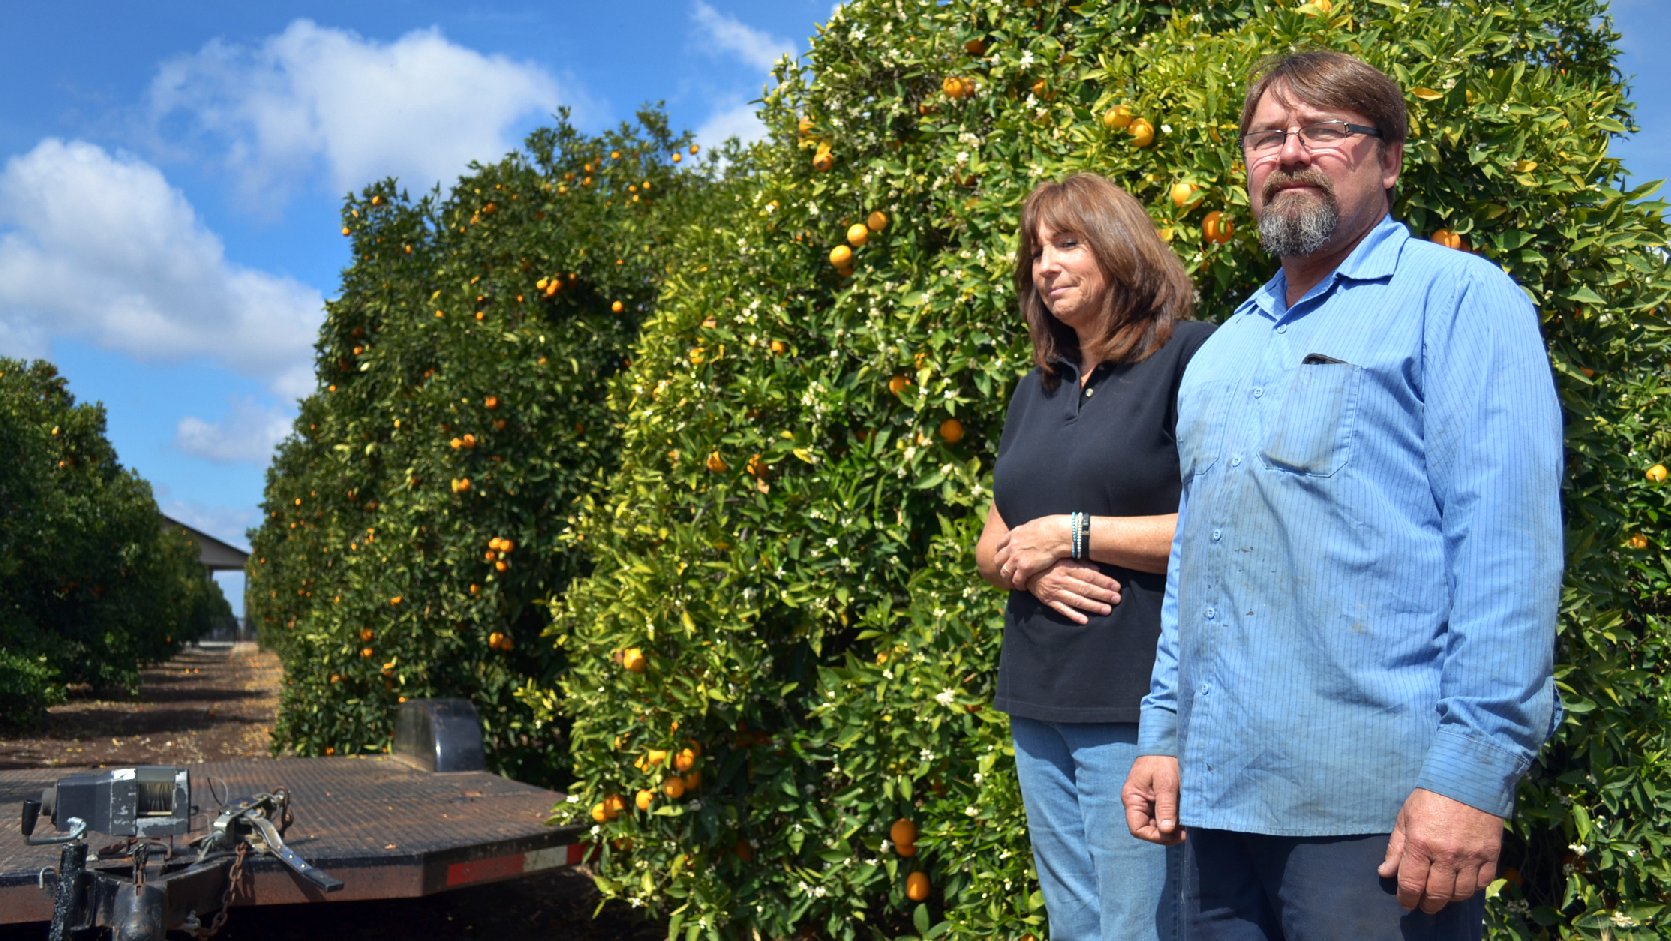 Recent rains kept Suzanne and Mike Collins' orange grove alive, but the rainy season is ending. If they don't get federal irrigation water by this summer, their trees will start dying. Photo: Kirk Siegler/NPR